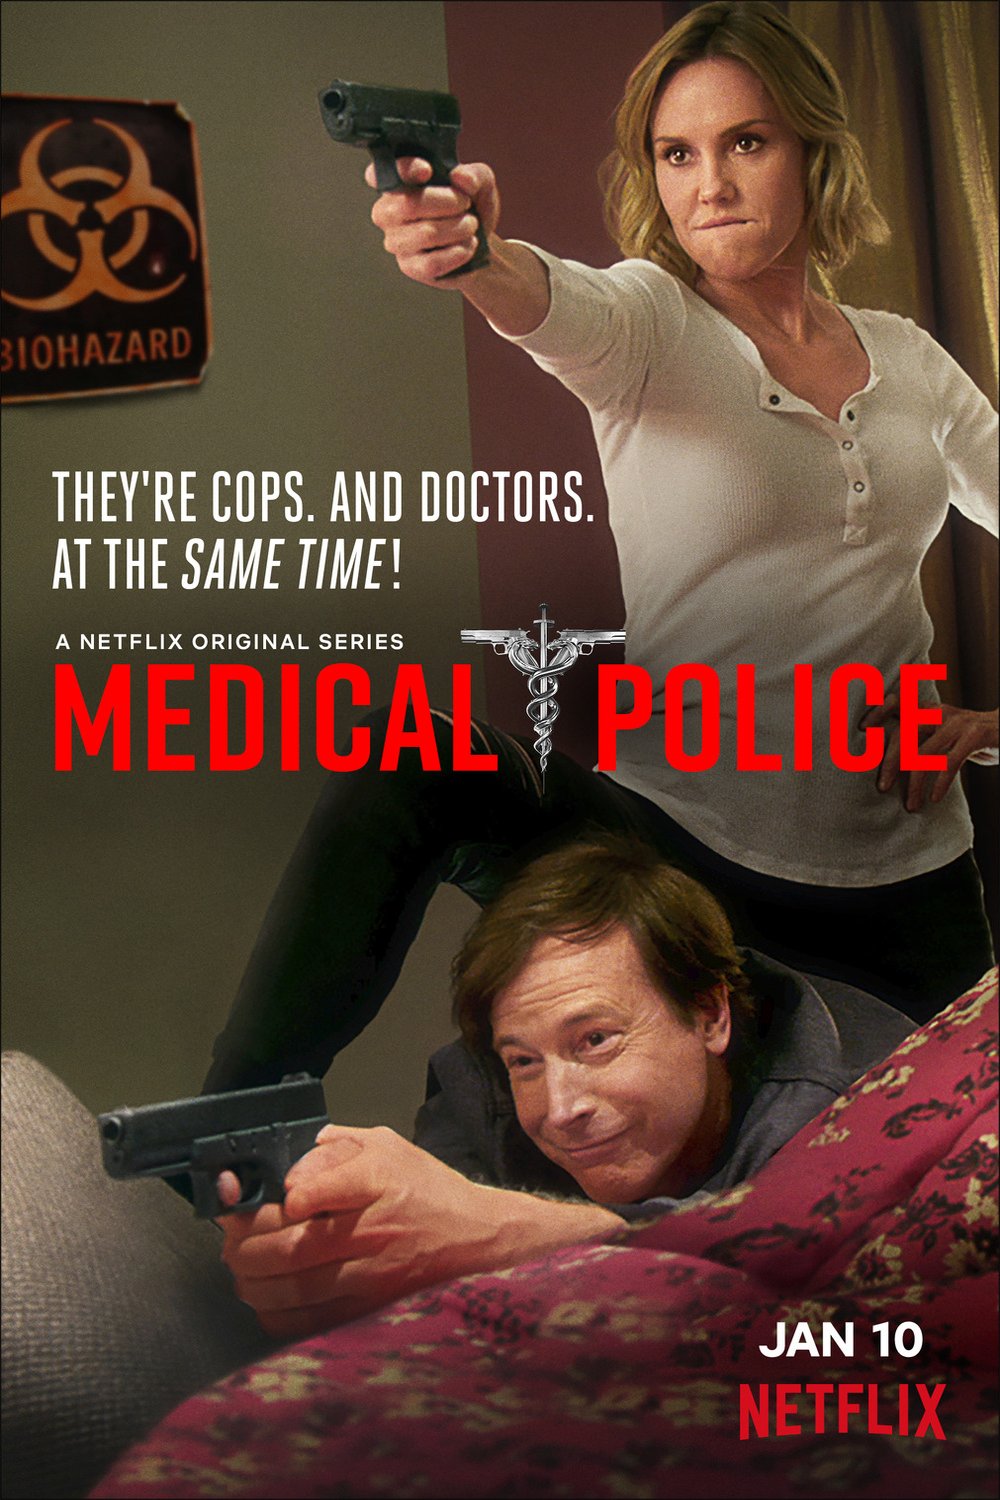 Poster of the movie Medical Police